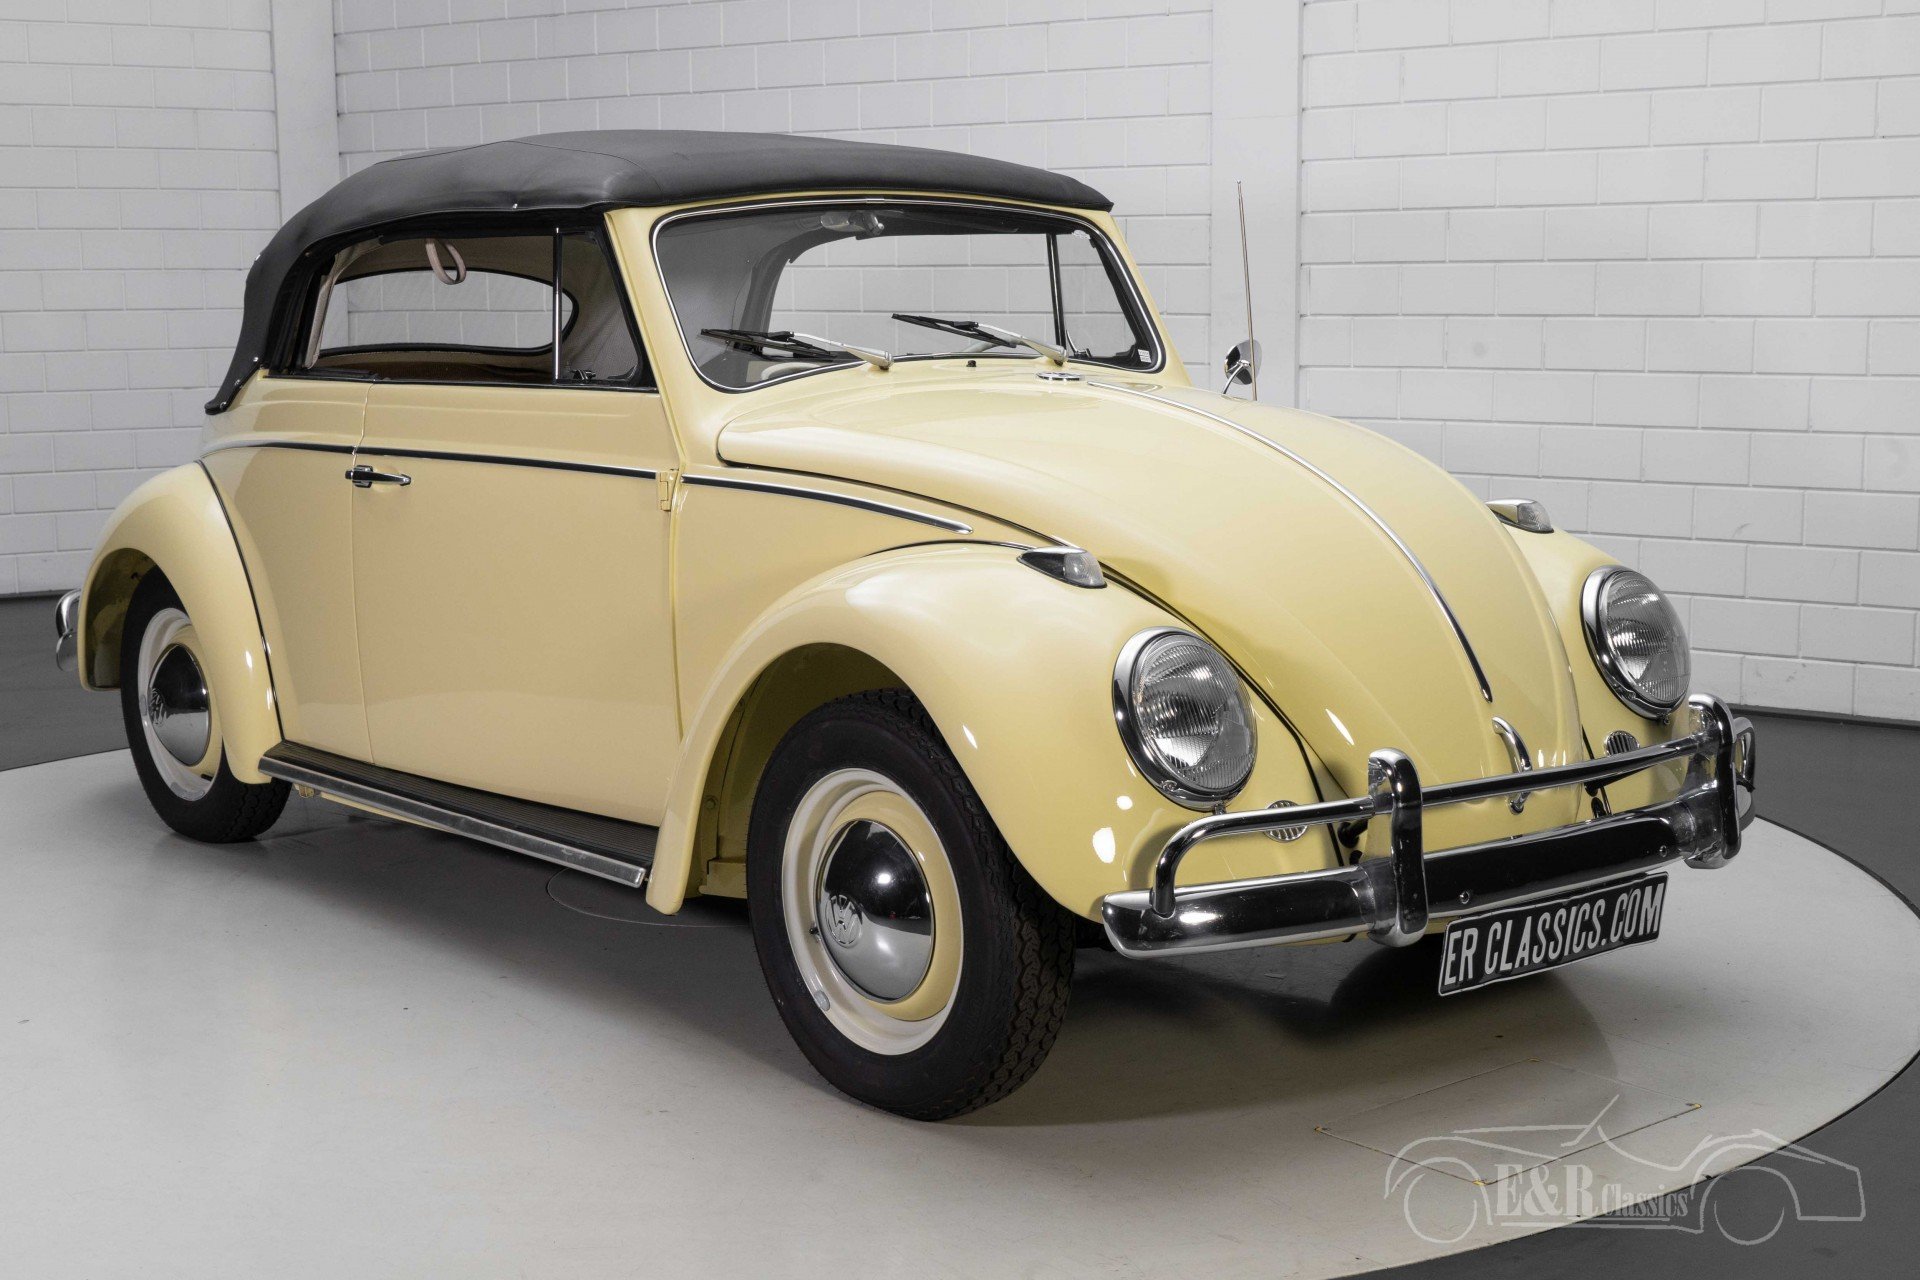 VW Beetle Cabriolet for sale at ERclassics